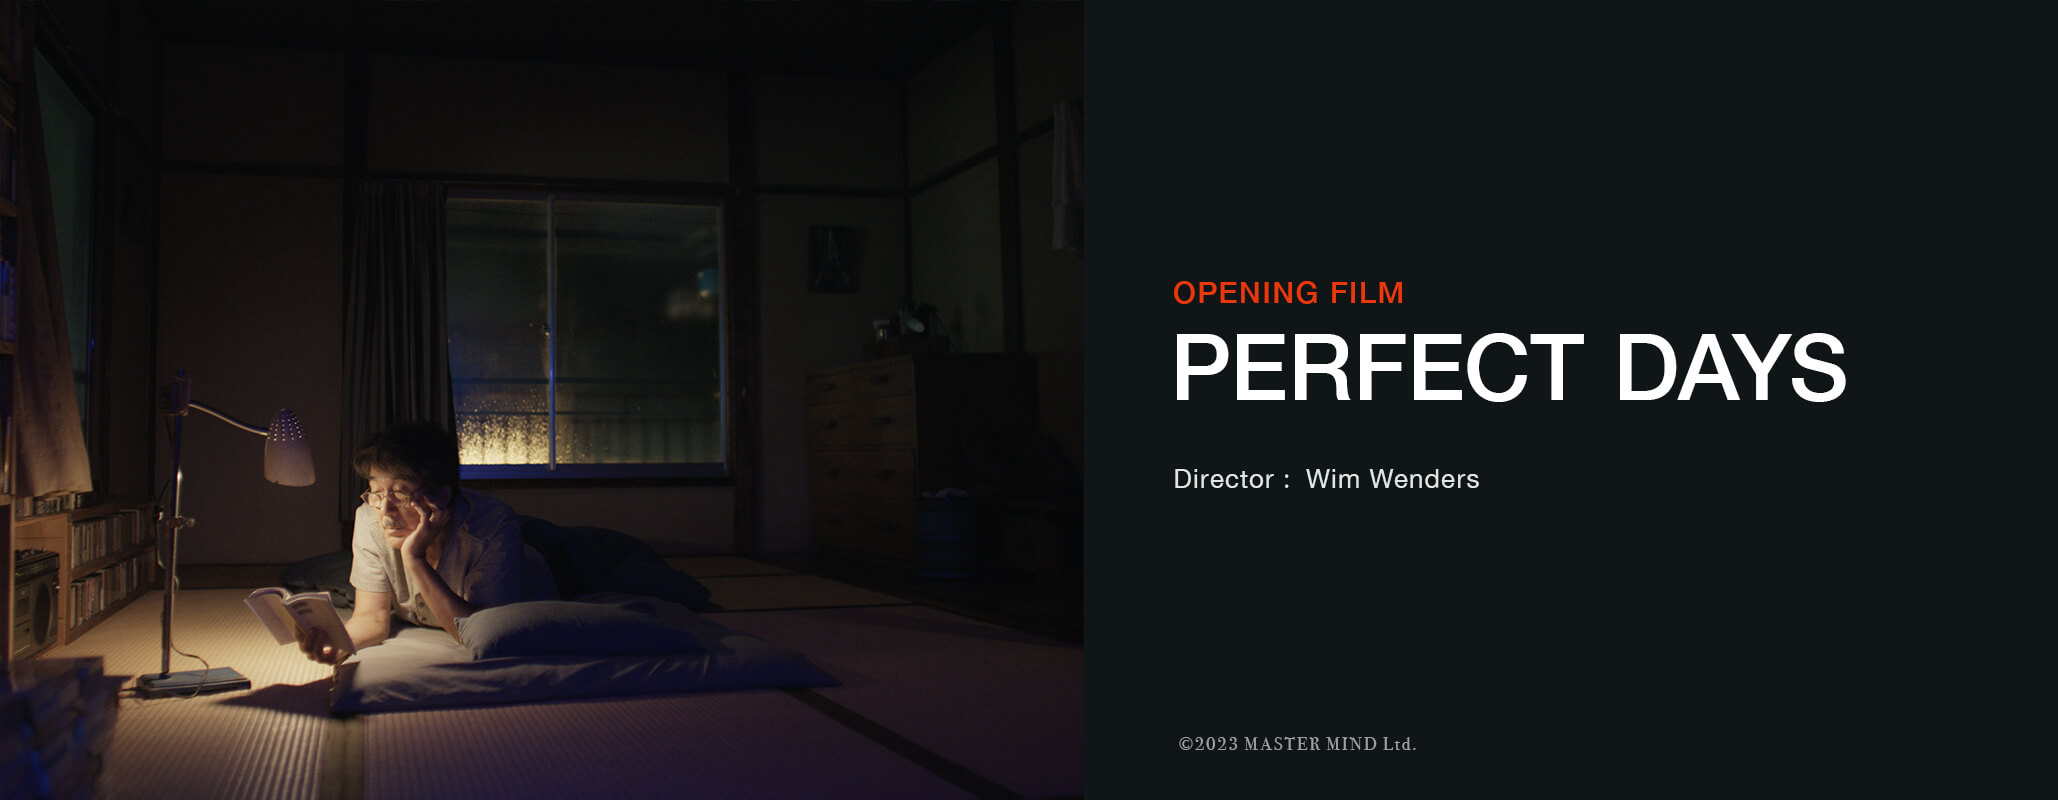 PERFECT DAYS will be the opening film of the 36th Tokyo International Film Festival!